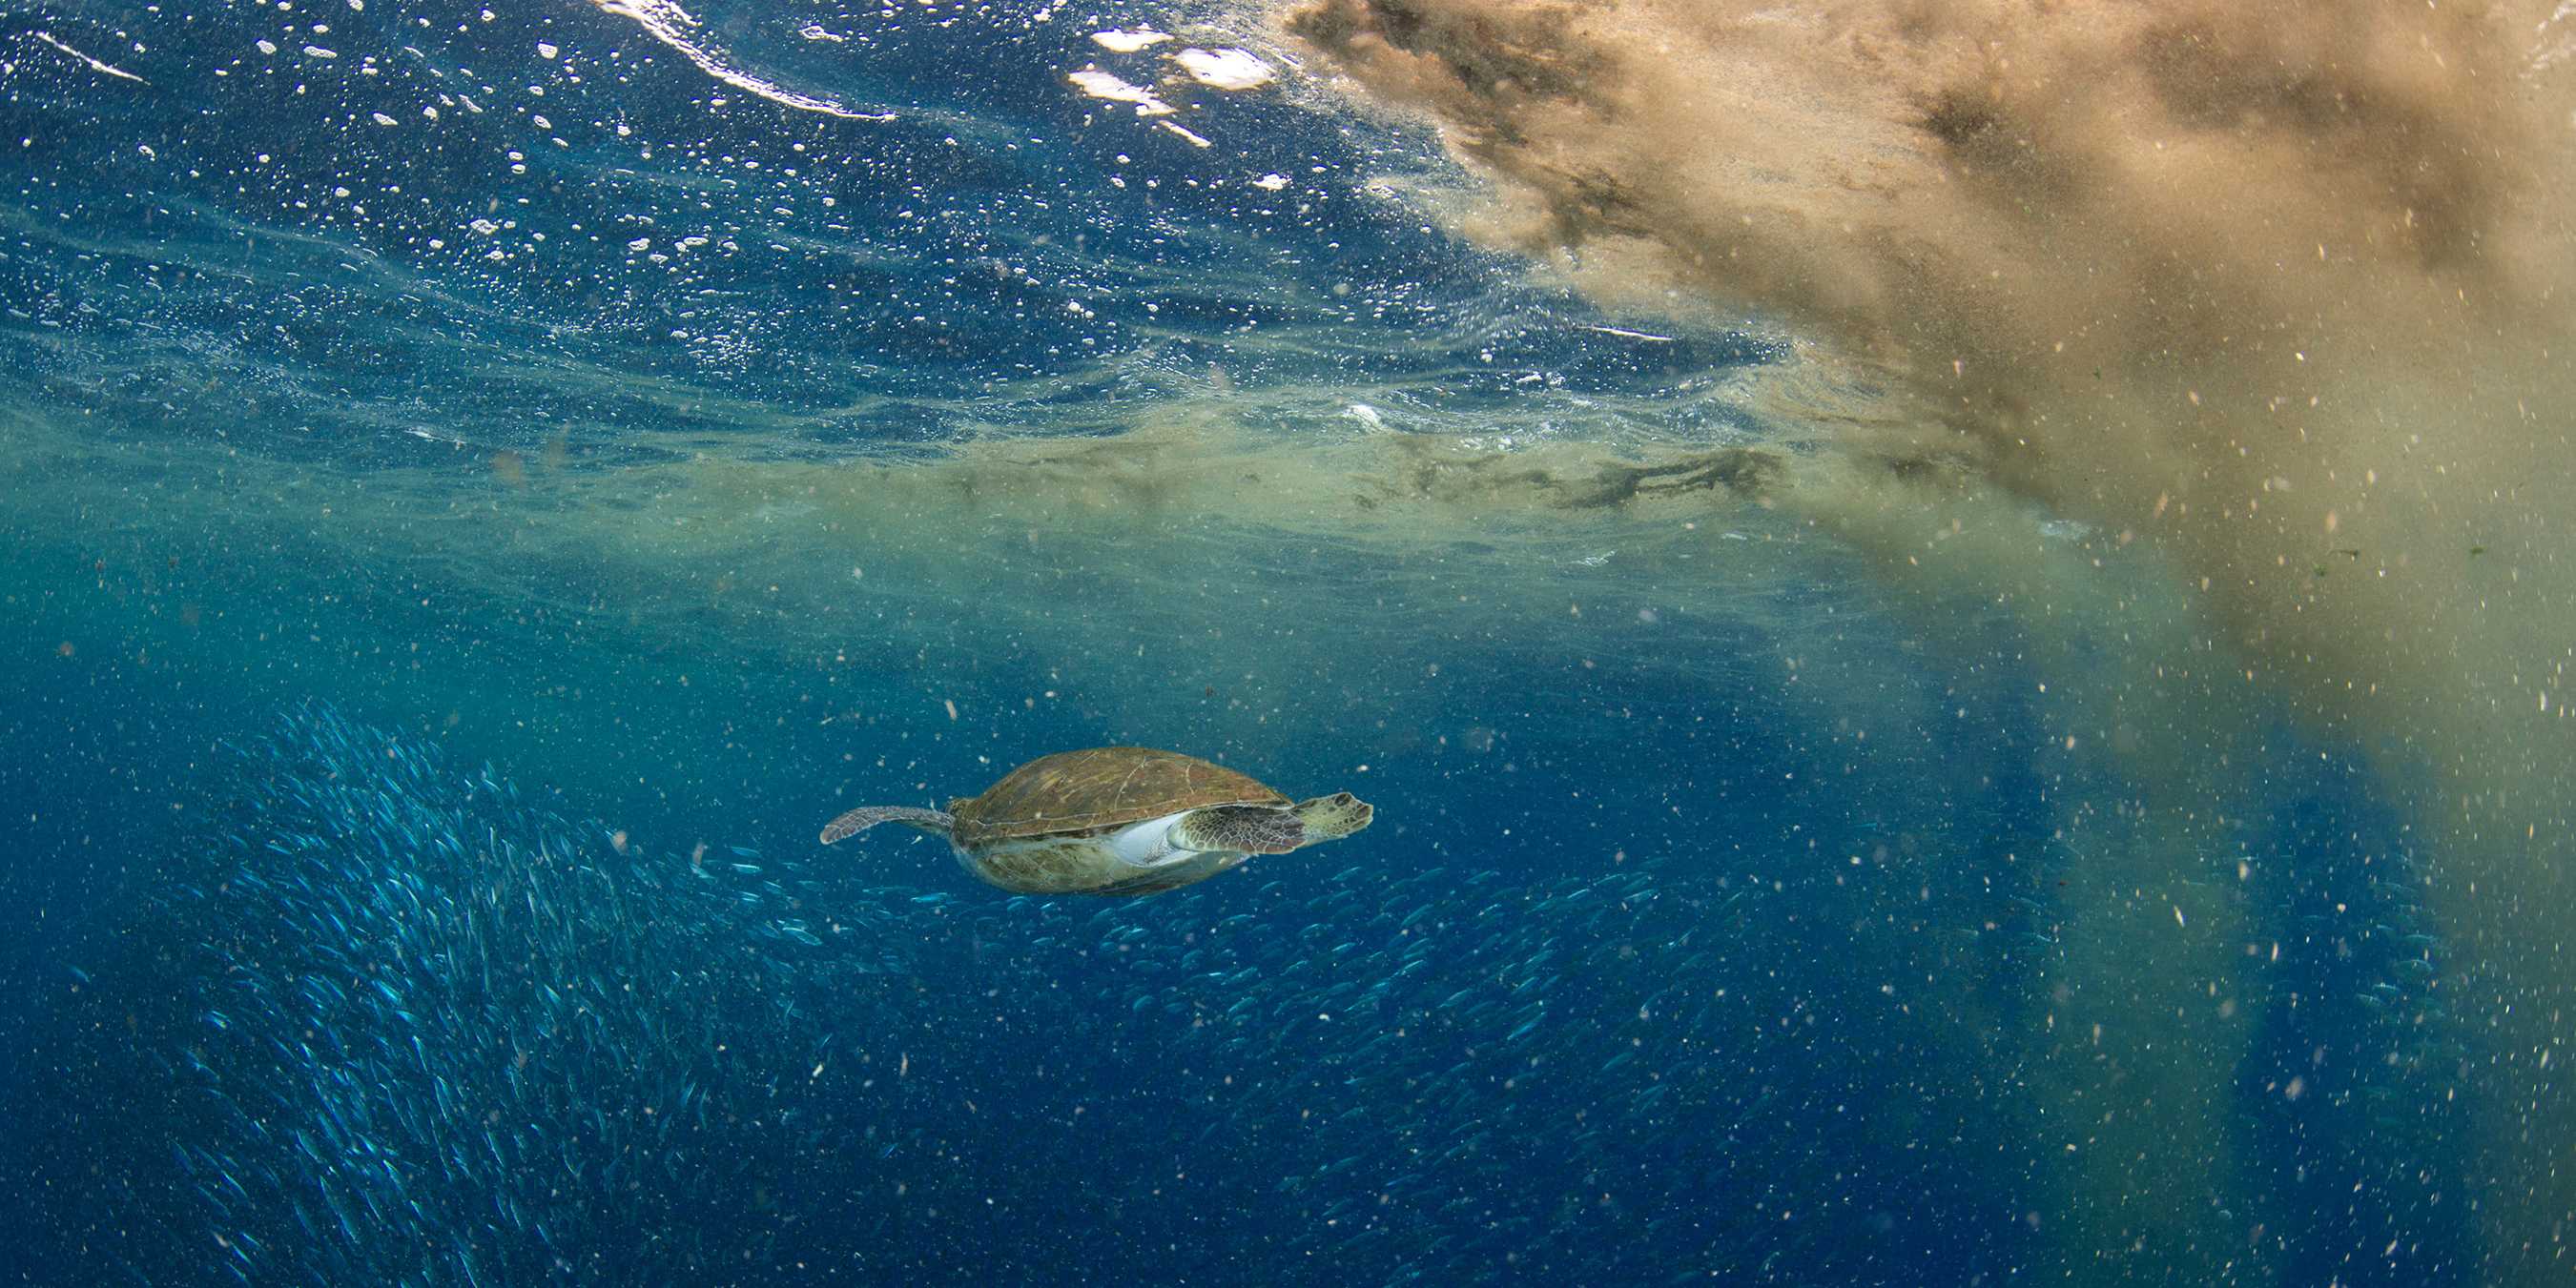 Turtle under water, in front of her a cloud of dust.